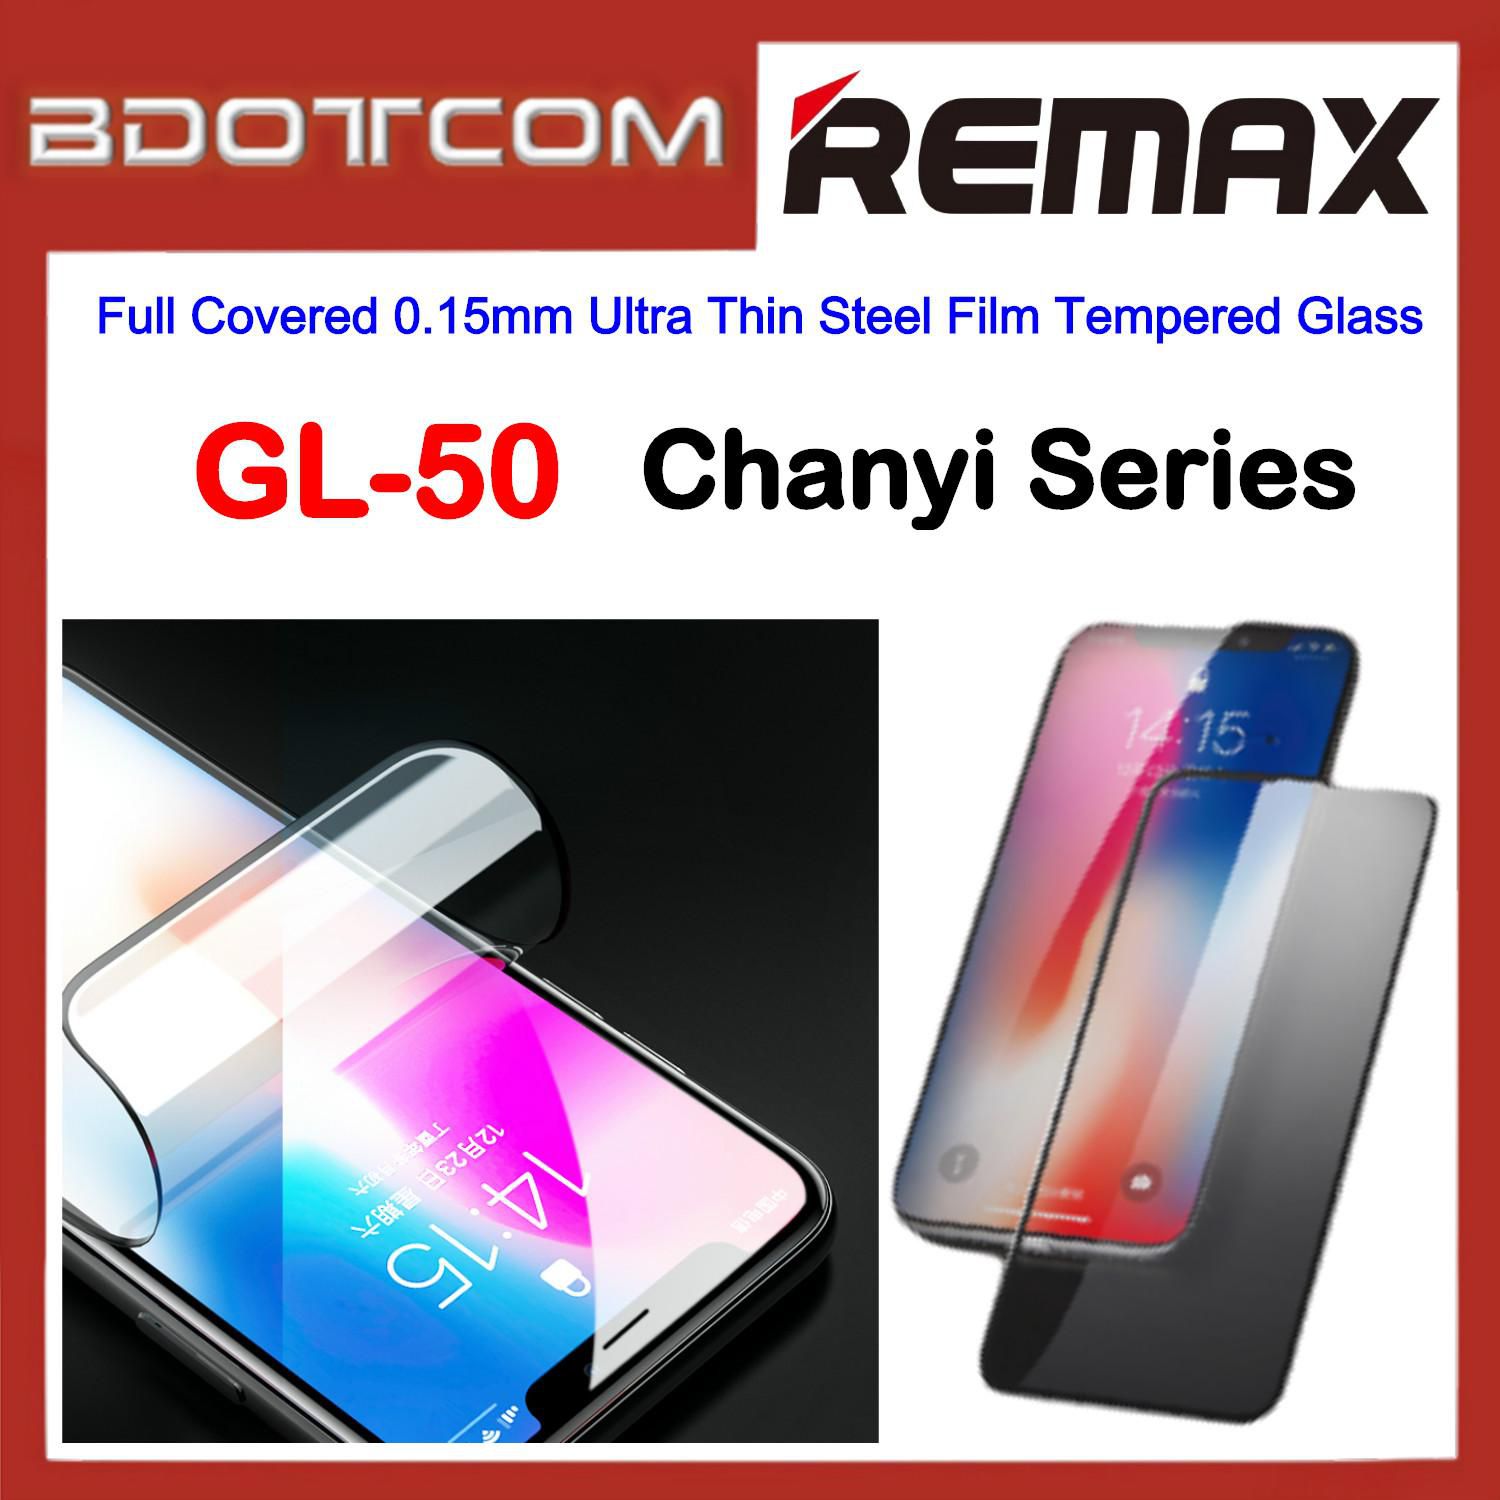 Remax GL-50 Chanyi Series Full Covered Film Tempered Glass Screen Protector